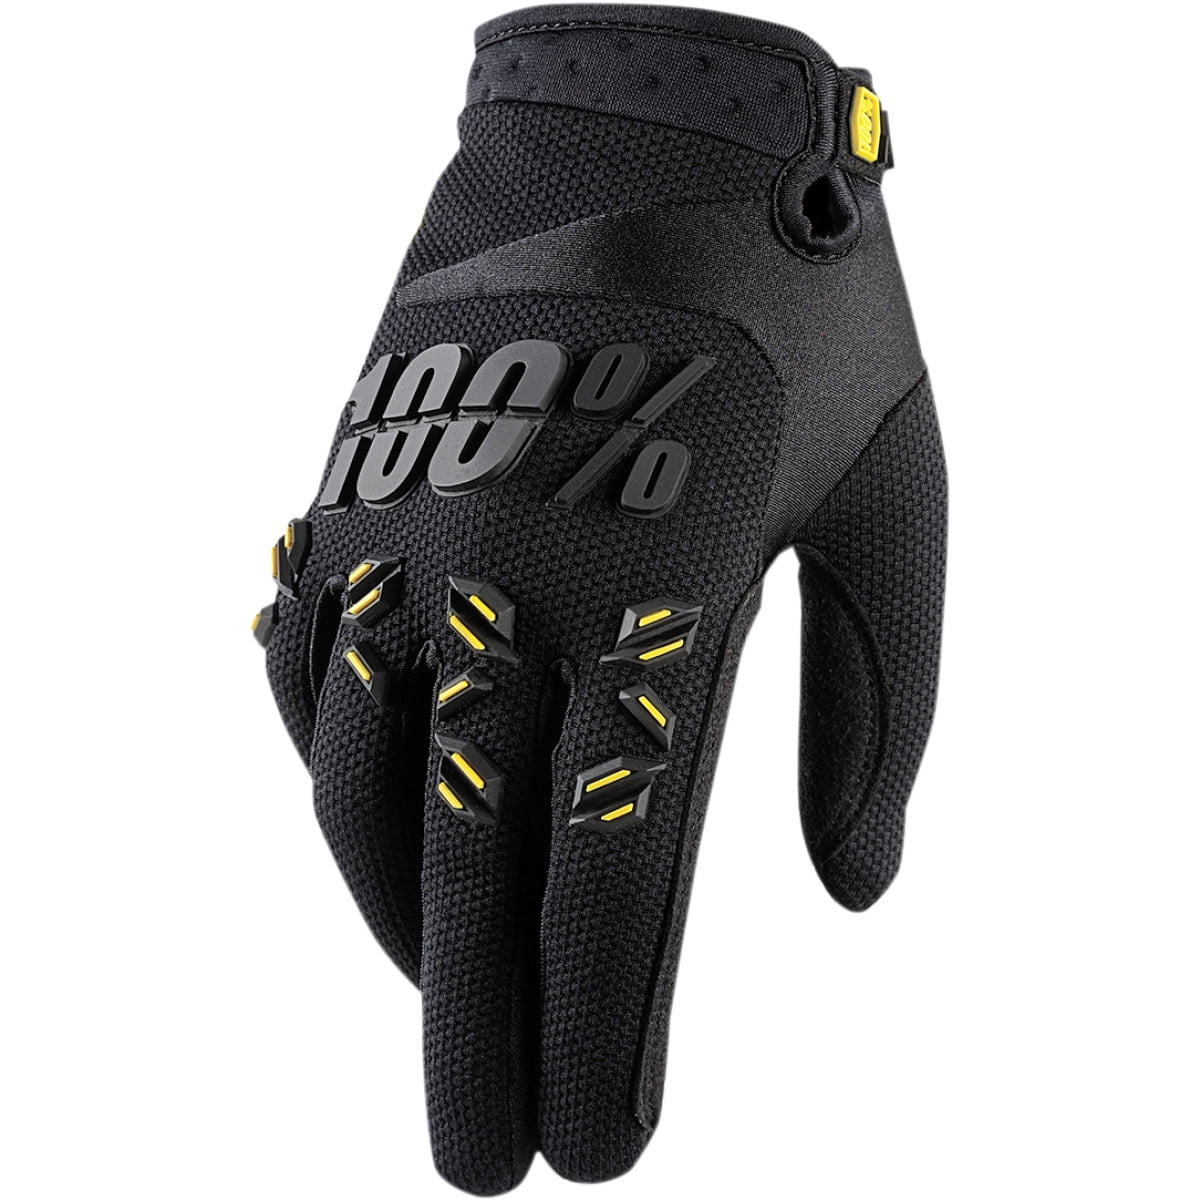 Yellow/Black/Large 100% Airmatic Mens Off-Road Motorcycle Gloves